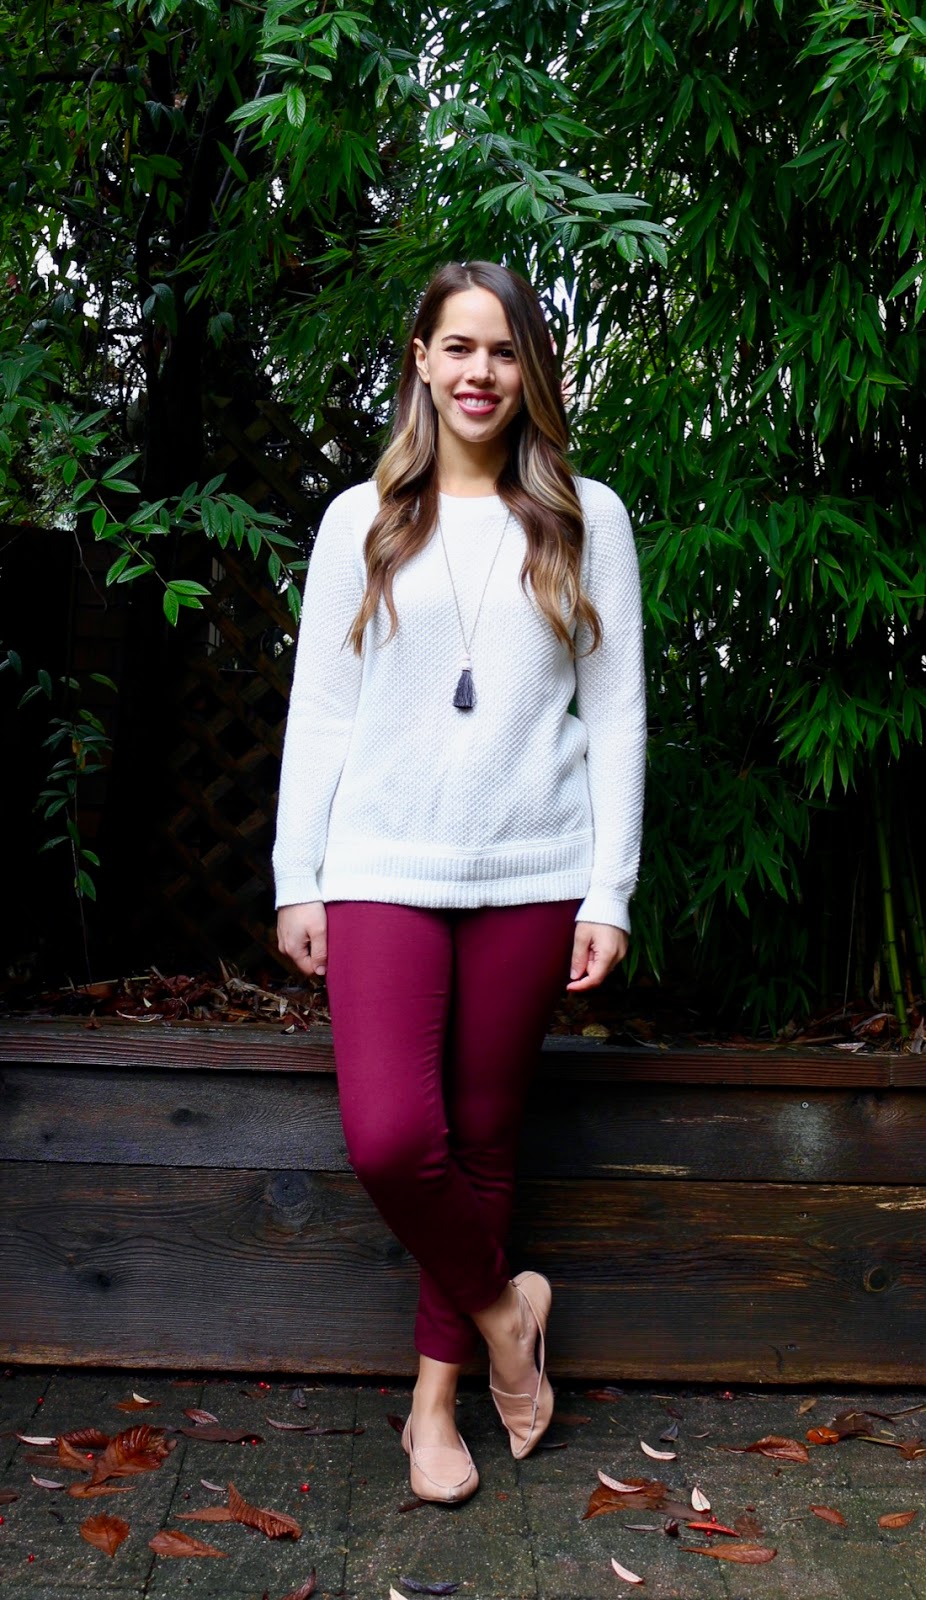 Jules in Flats - Old Navy Textured Crew Neck Sweater + Burgundy Ankle Pants (Business Casual Fall Workwear on a Budget)